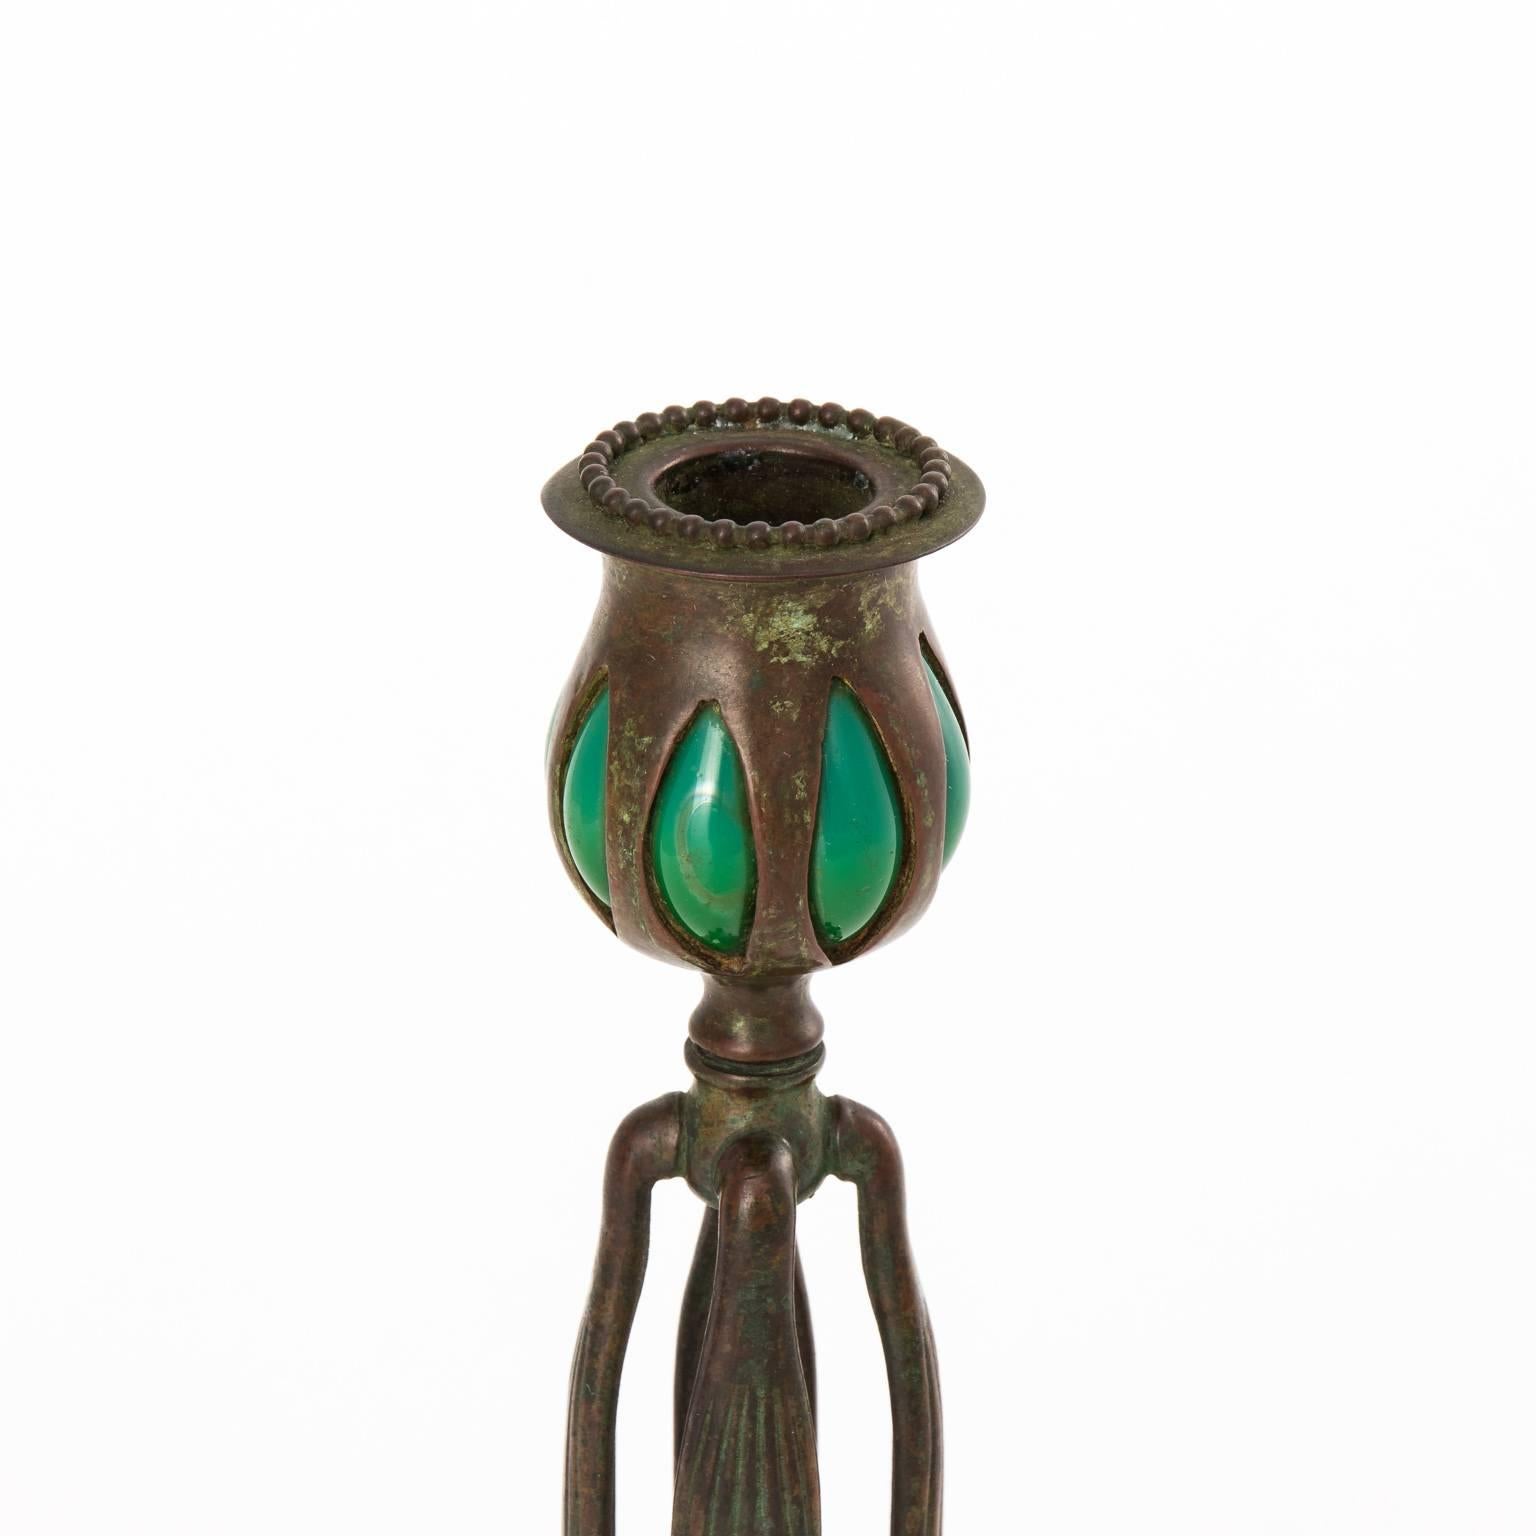 Tiffany Studio four-leg candleholder with green blown glass and lion's paw feet, circa late 19th century.
 